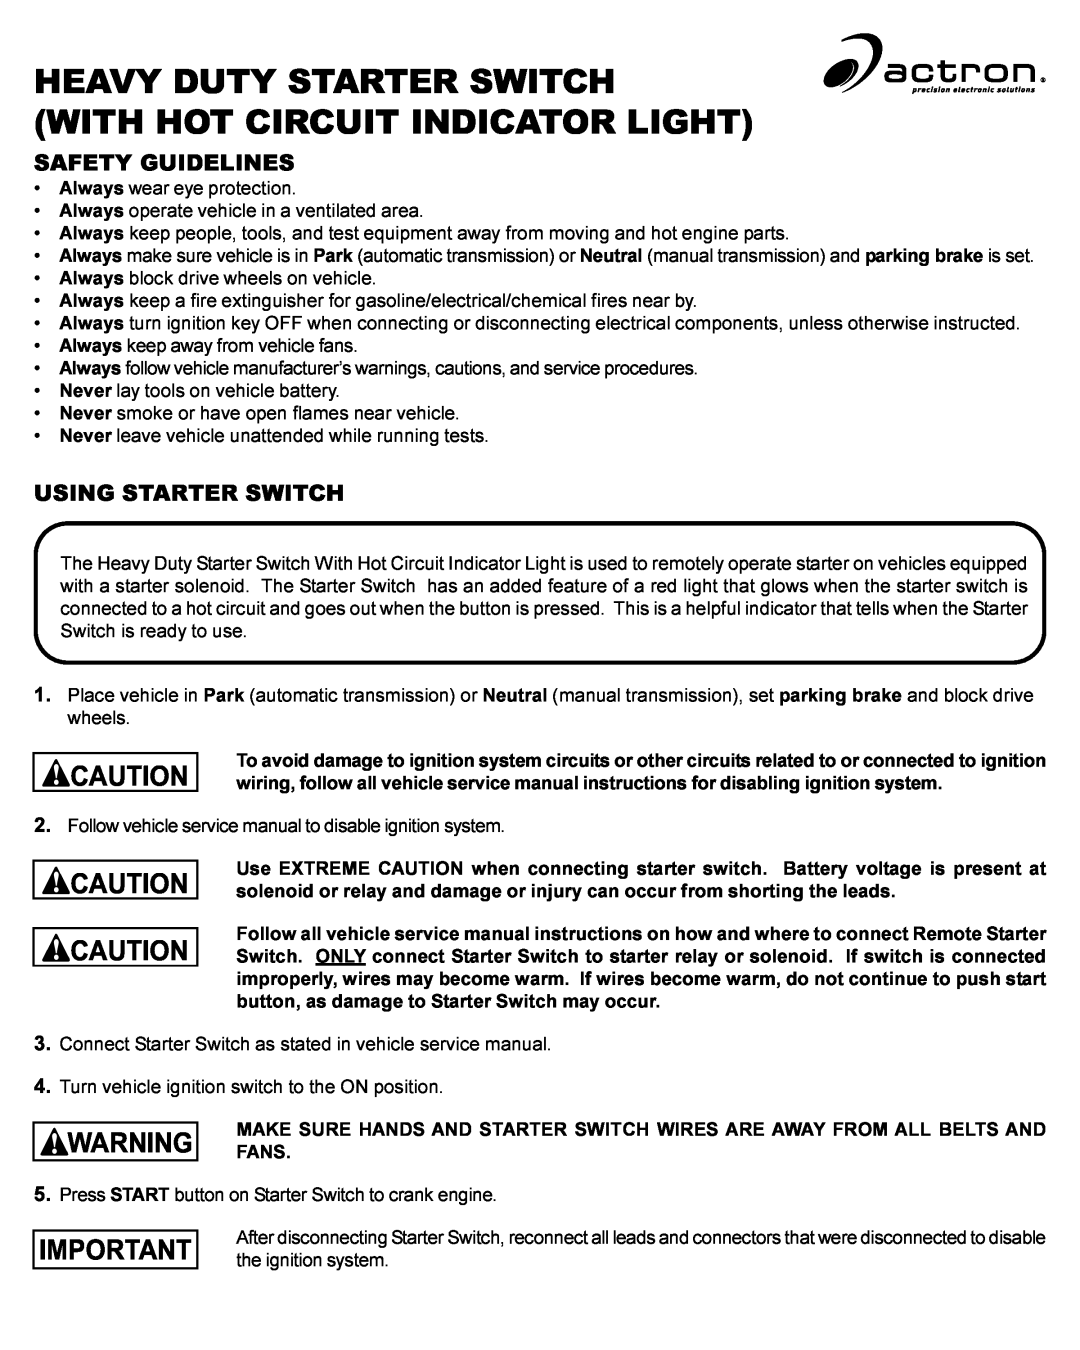 Actron service manual Safety Guidelines, Using Starter Switch 